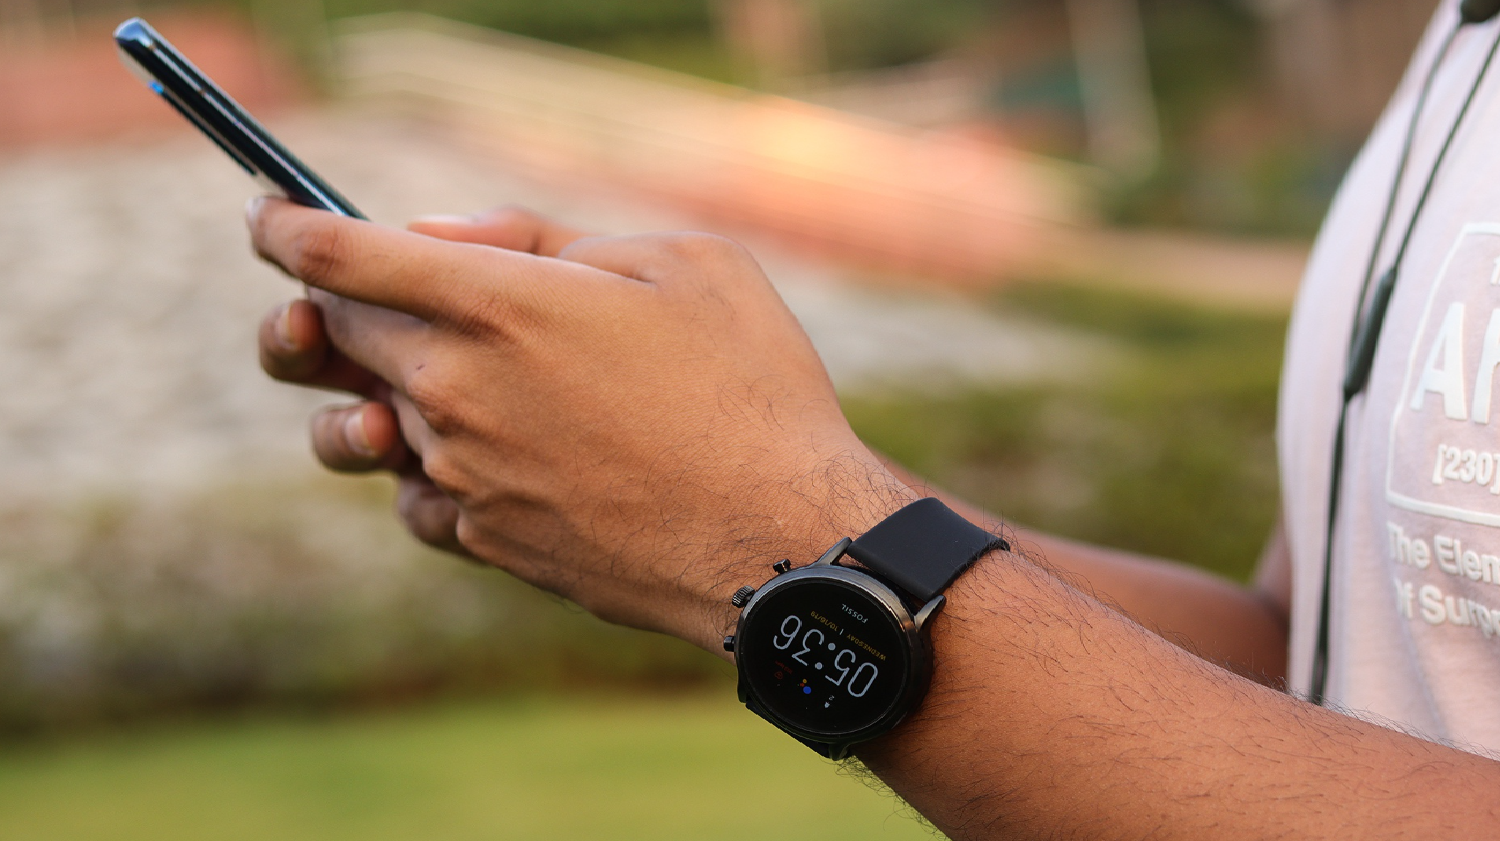 why consider third-party smartwatches